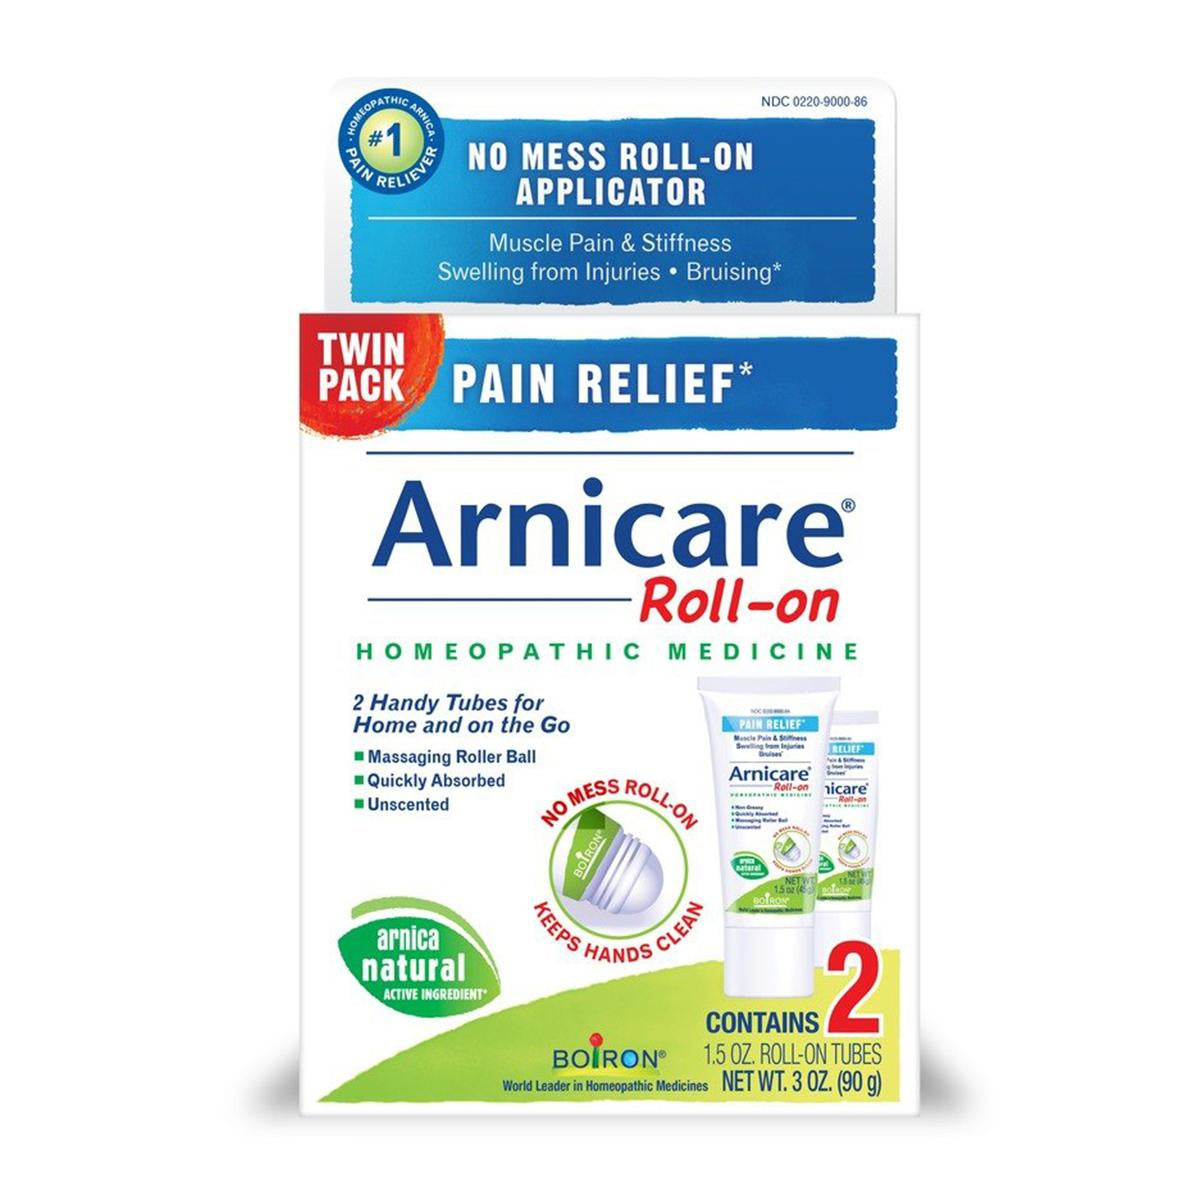 Primary image of Arnicare Roll-on Twin Pack